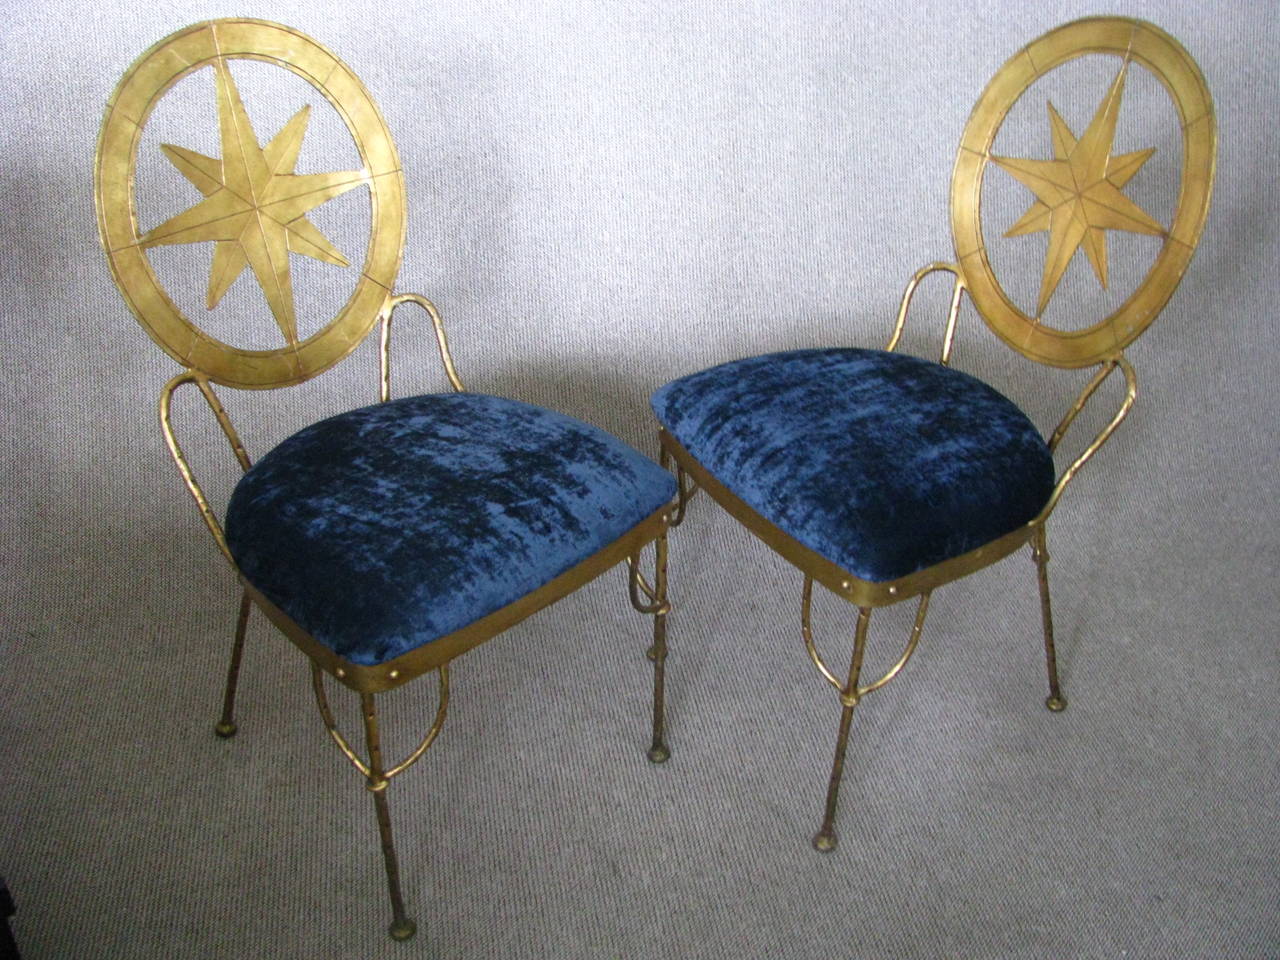 Set of six dining room chairs in wrought iron with a gold leaf patina.
France, circa 1940. Newly upholstered with a high quality Atlantic blue velvet!
Probably a work of one of French art deco iron artists René Prou or René